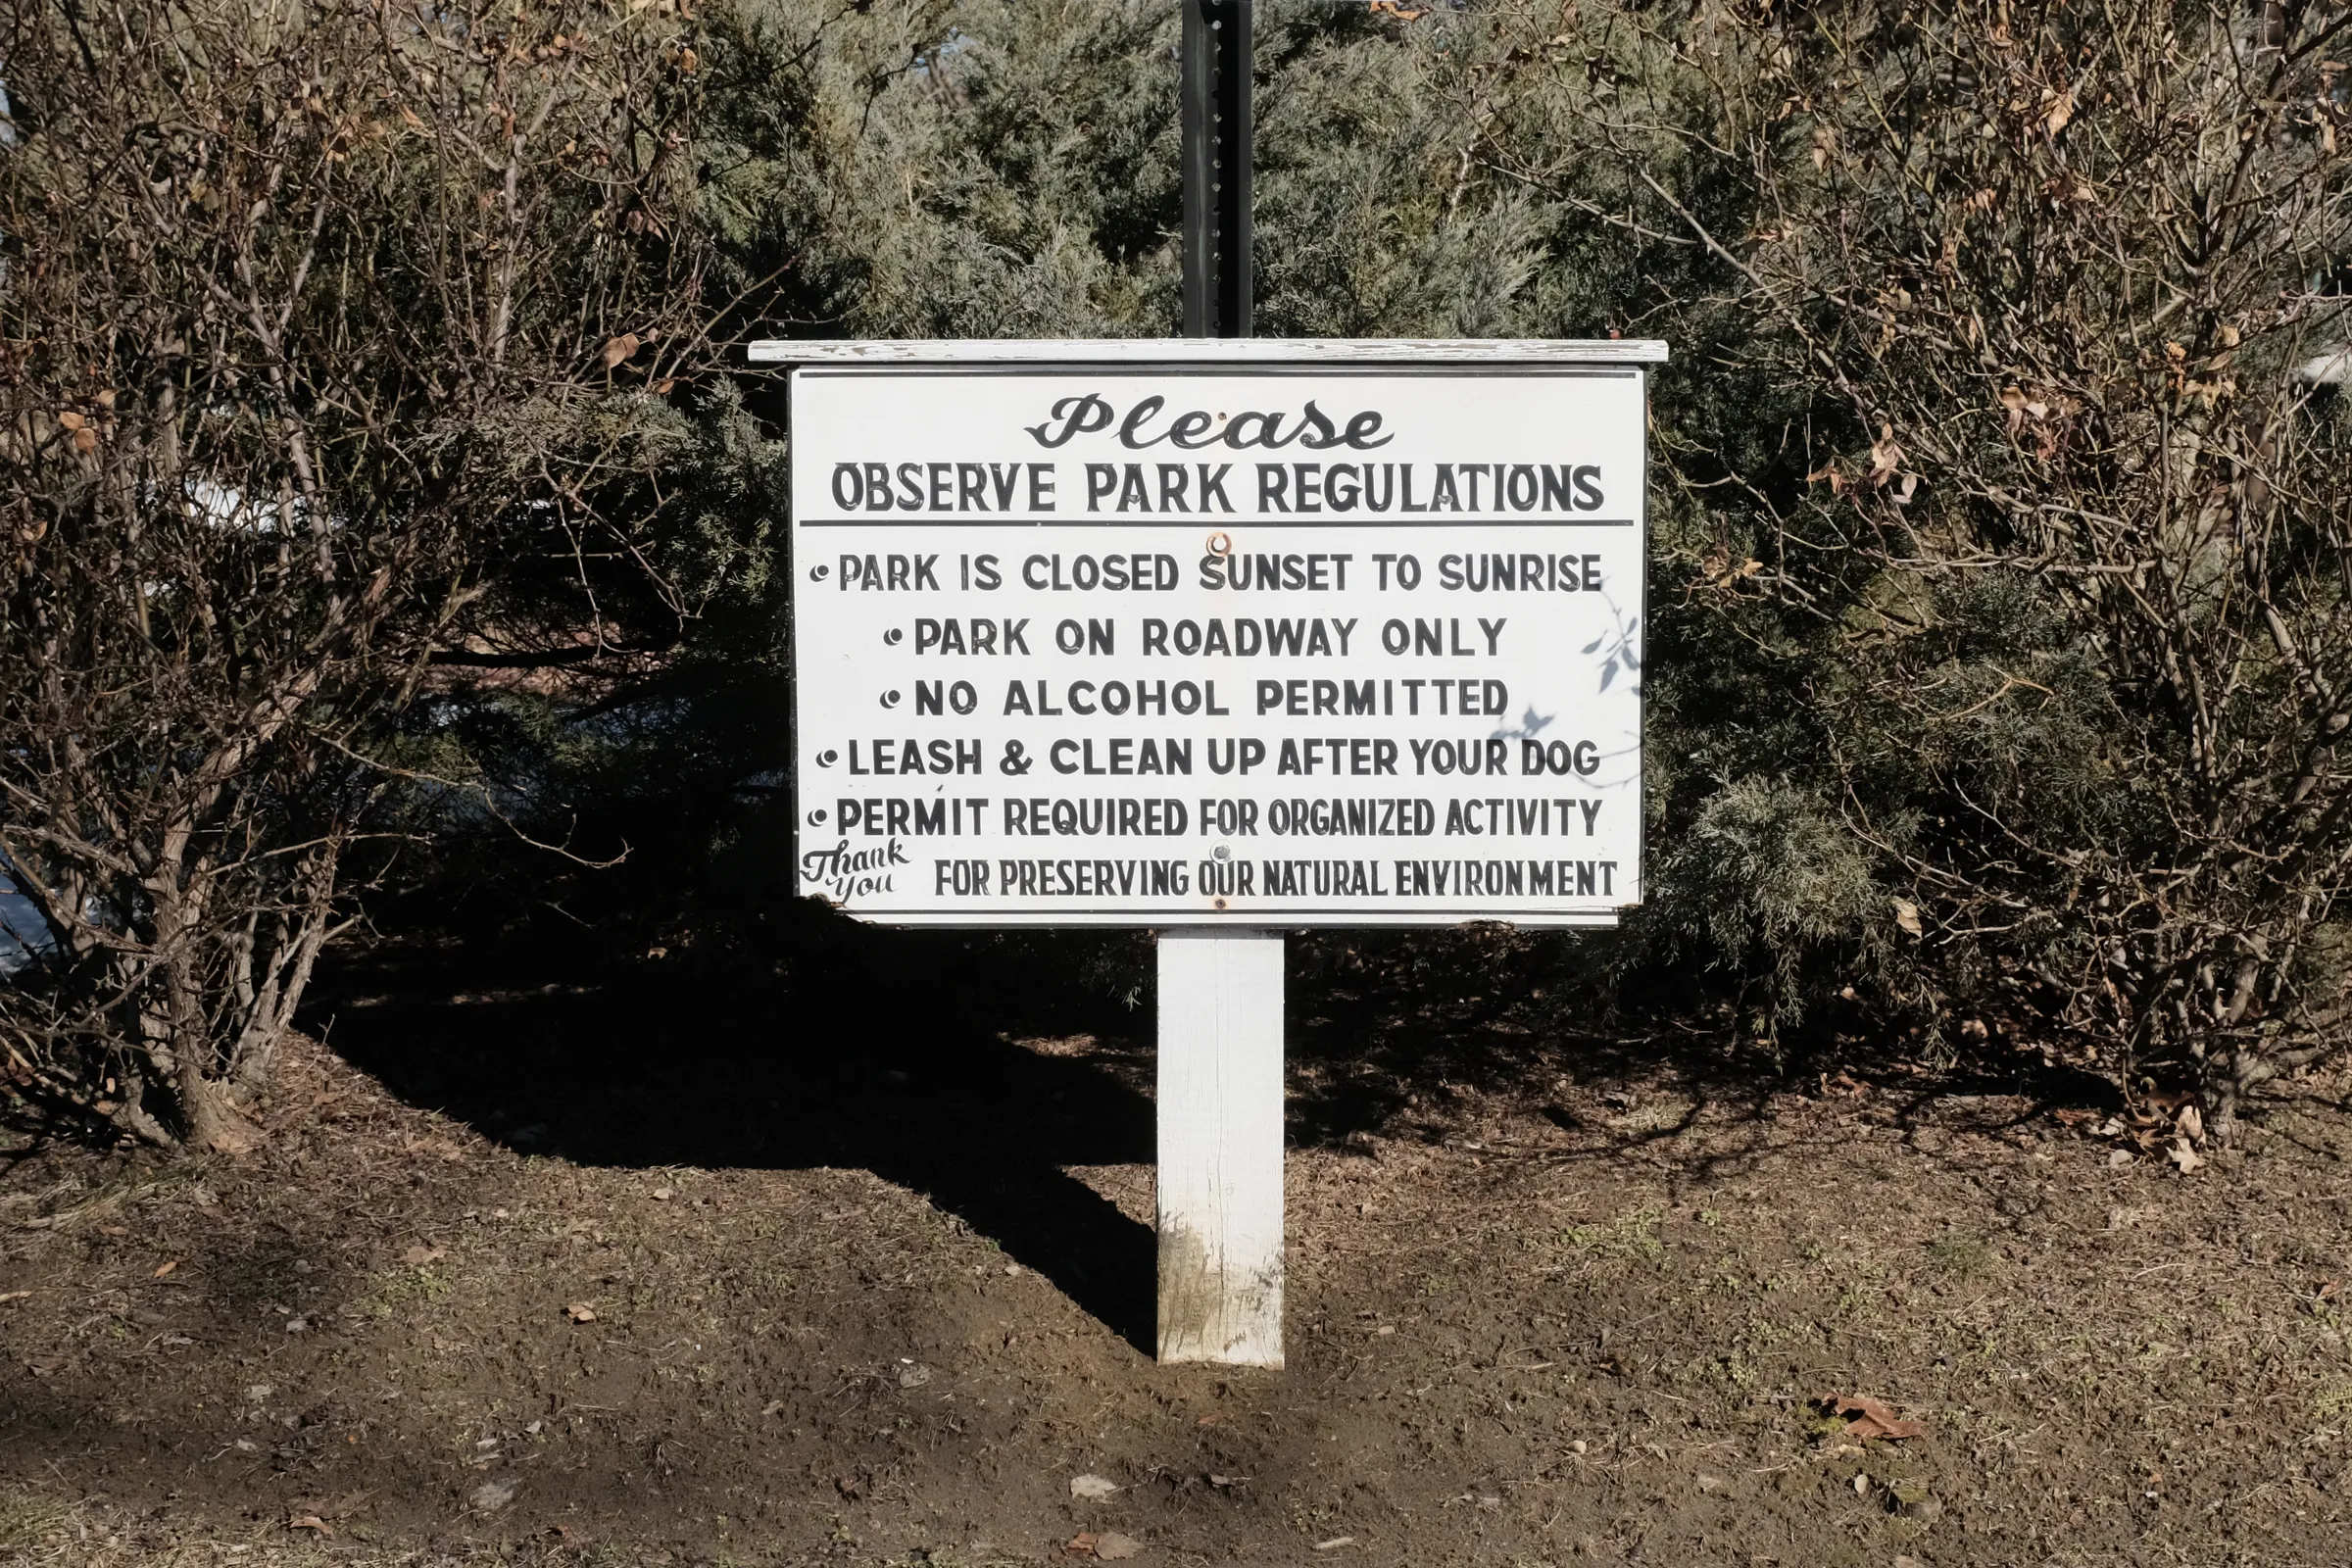 A small rectangular, wooden sign on a wooden post. The white paint is beginning to chip, the black letters are faded. The words appear hand stenciled, except for wide script of 'please' and 'thank you.' The sign reads: 'Please, observe park regulations. Park is closed sunset to sunrise. Park on roadway only. No alcohol permitted. Leash and clean up after your dog. Permit required for organized activity. Thank you for preserving our natural environment.'